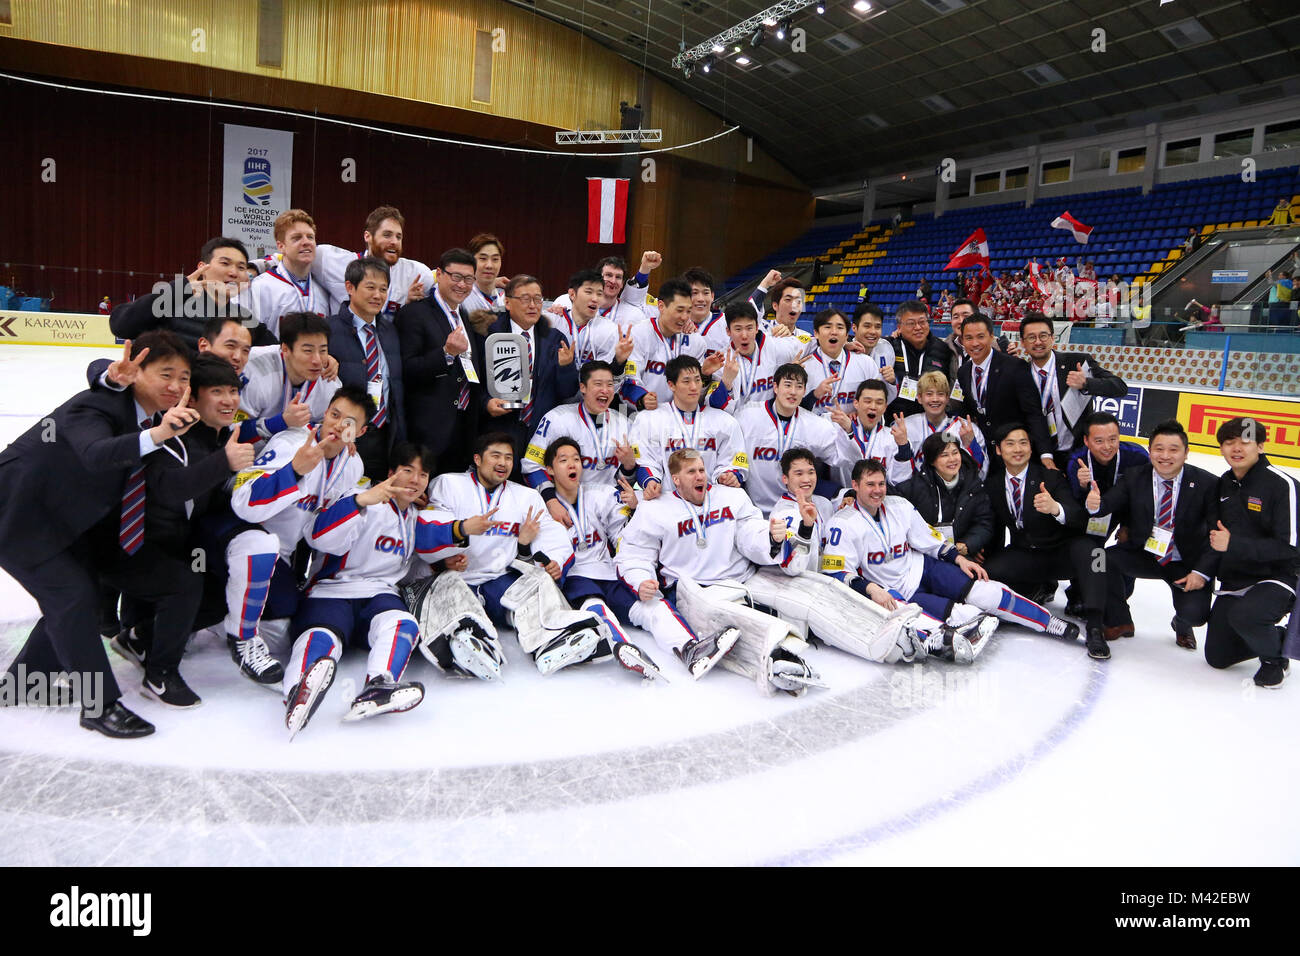 KYIV, UKRAINE - APRIL 28, 2017: Team of South Korea, silver medalist of the IIHF 2017 Ice Hockey World Championship Div 1A, pose for a group photo at  Stock Photo